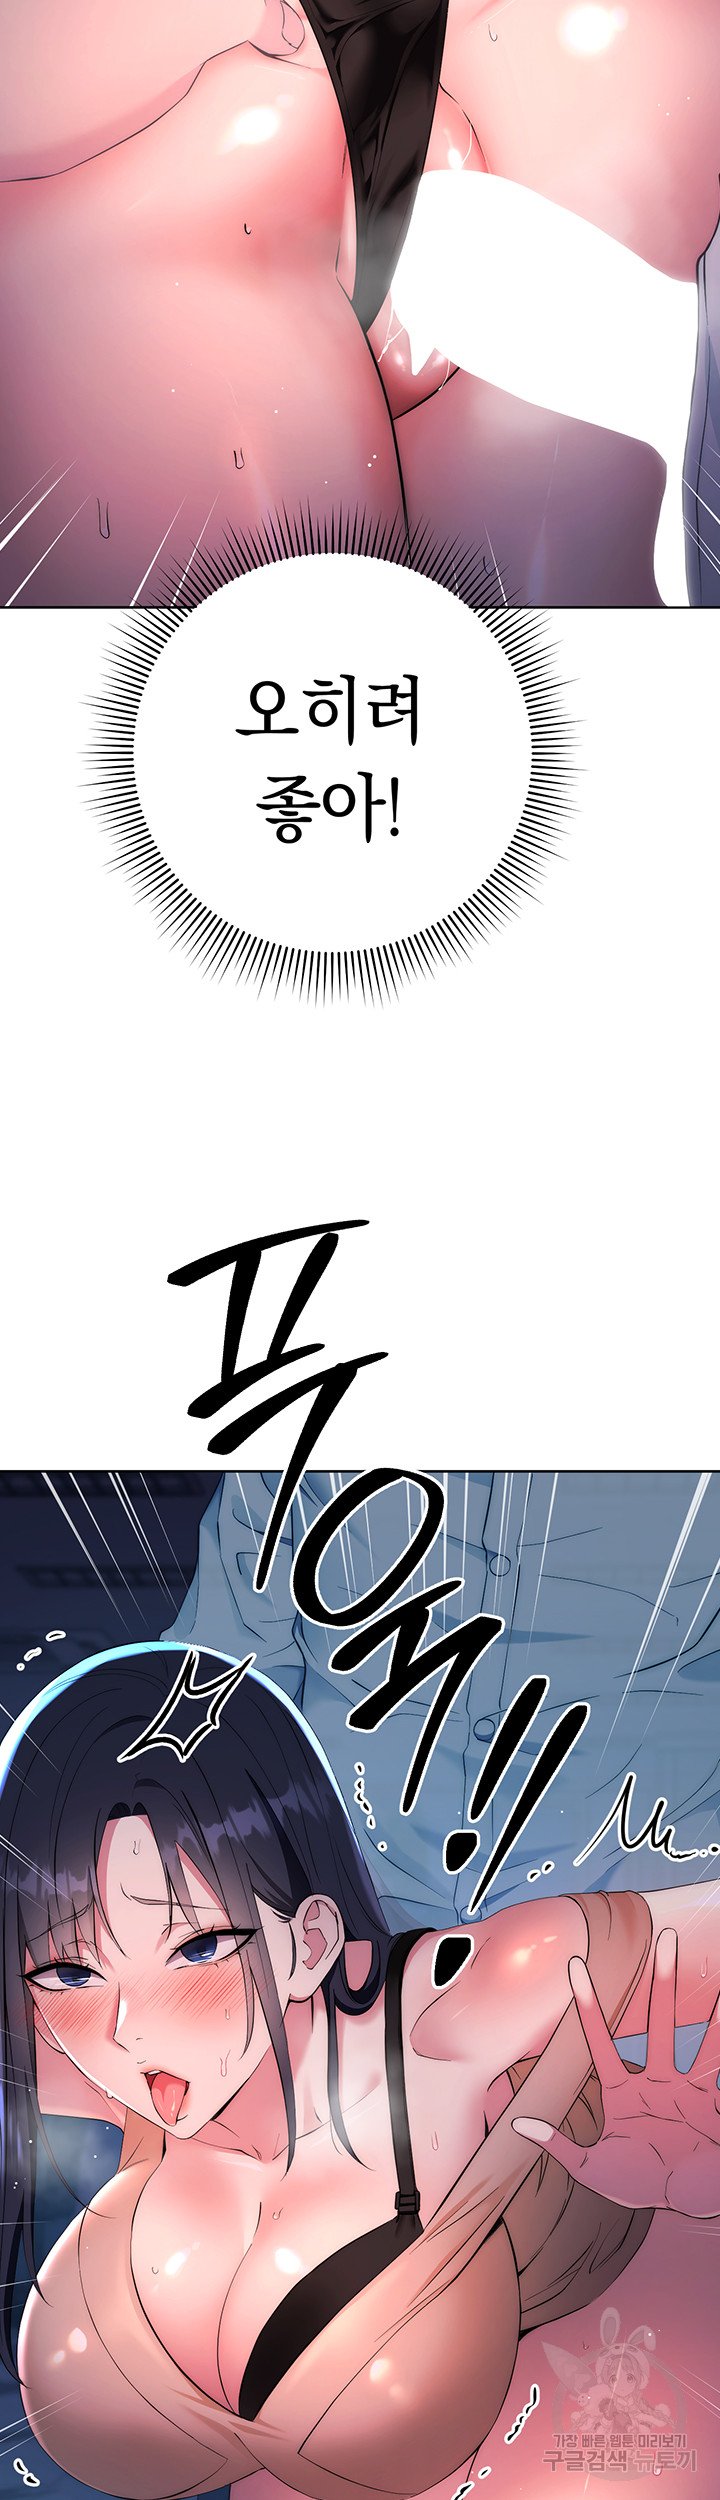 outsider-the-invisible-man-raw-chap-3-24